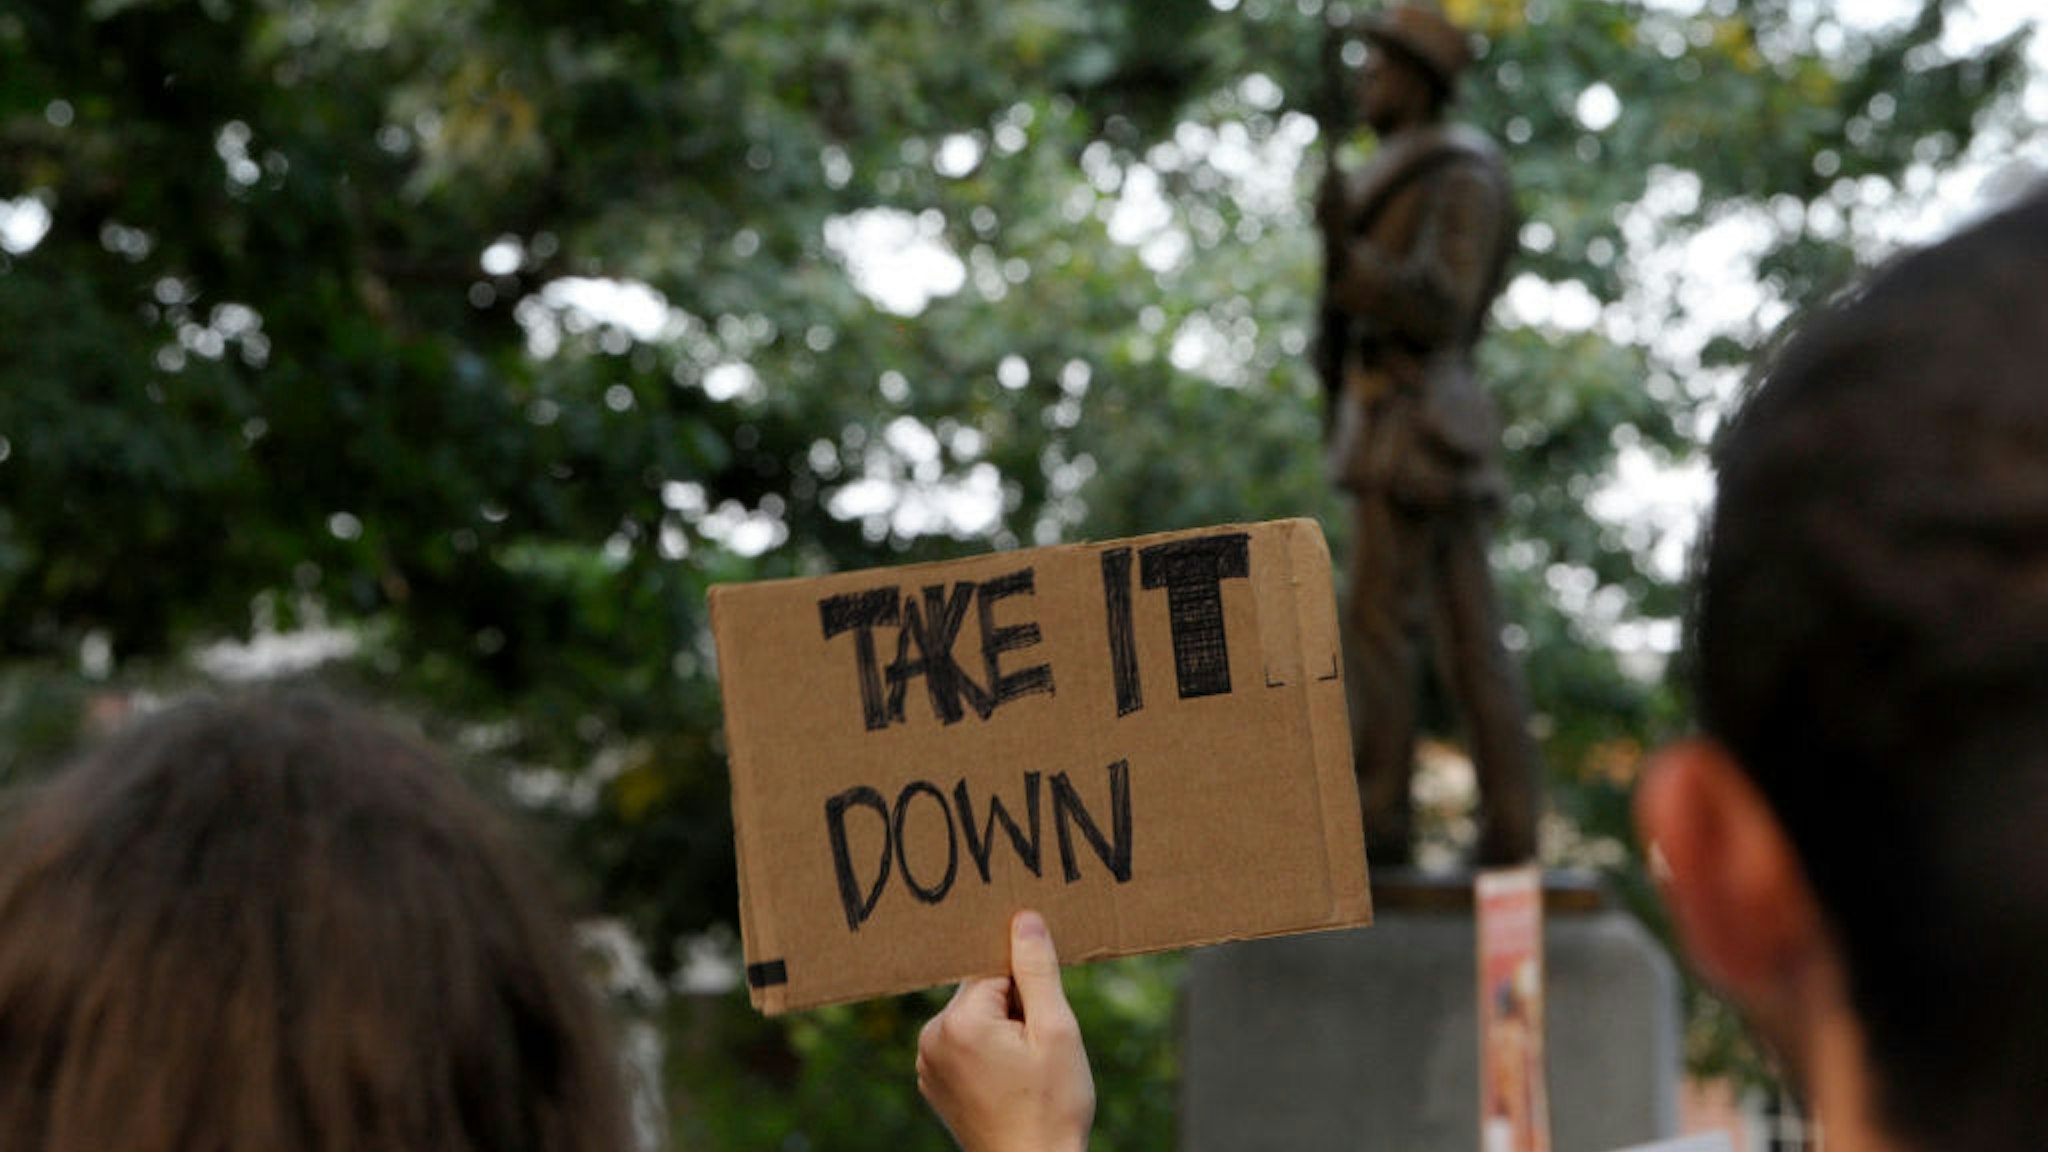 Demonstrators rally for the removal of a Confederate statue coined Silent Sam on the campus of the University of Chapel Hill on August 22, 2017 in Chapel Hill North Carolina. (Photo by Sara D. Davis/Getty Images)